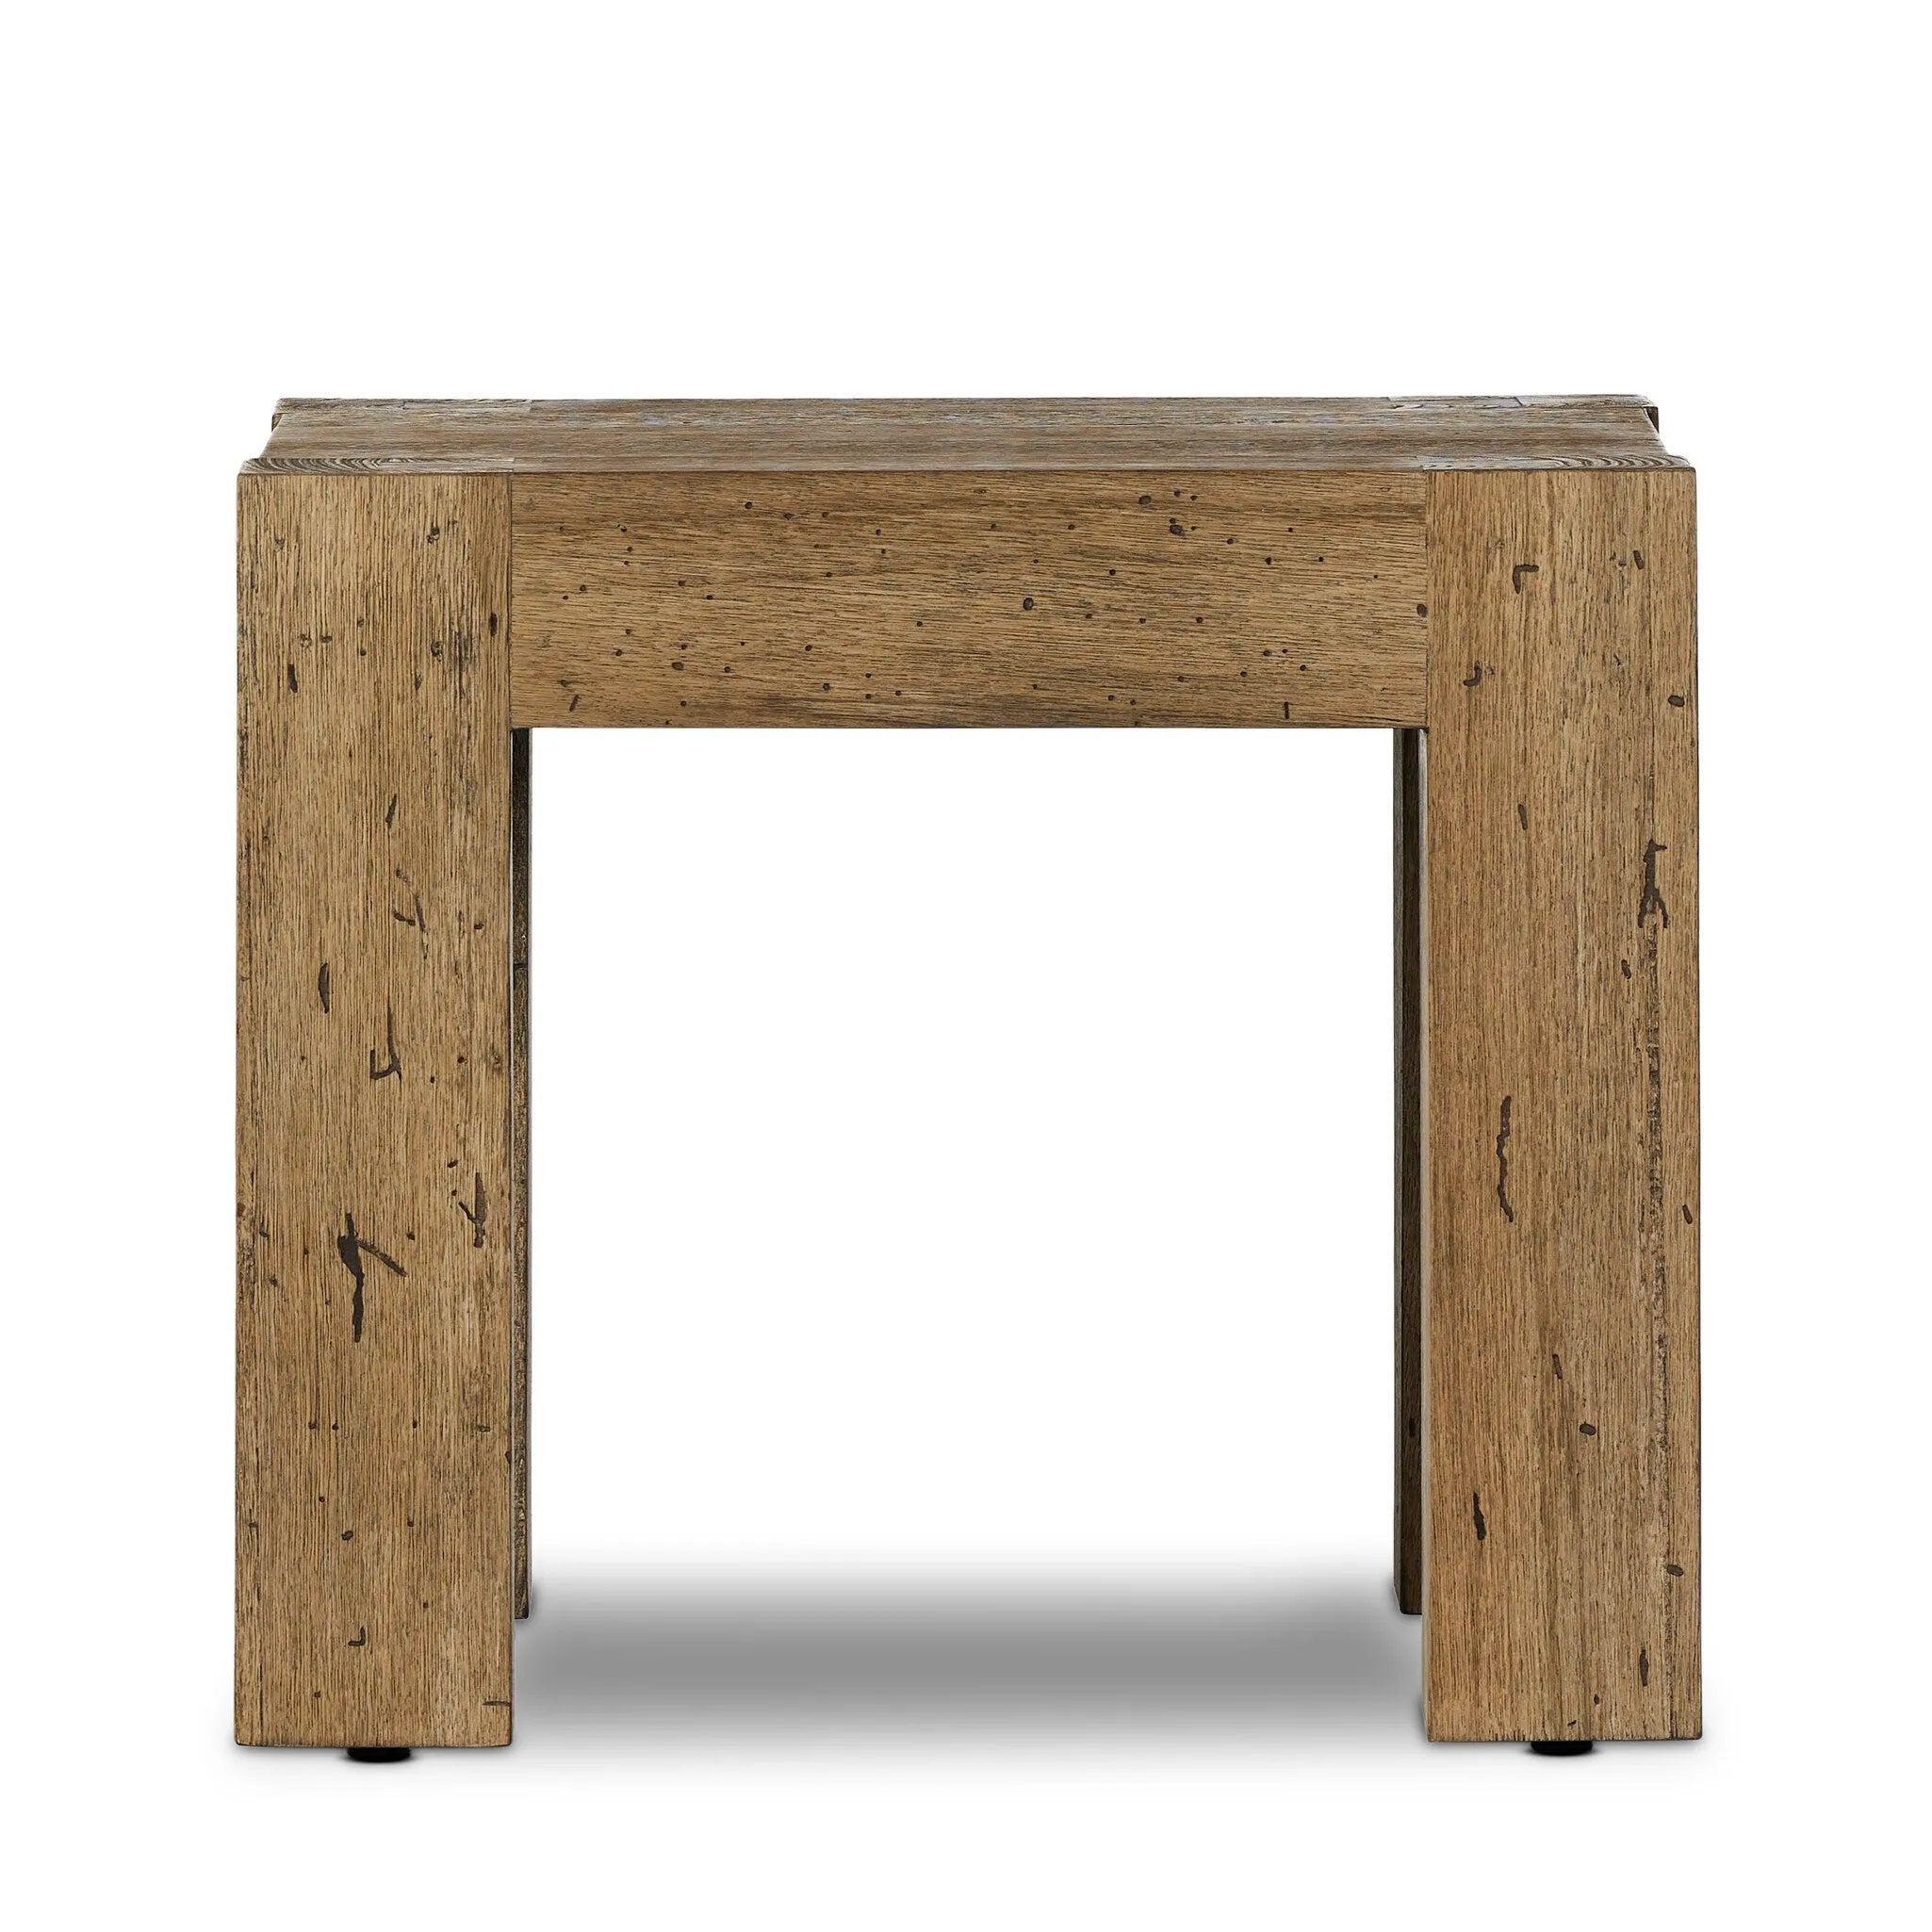 Made from thick-cut oak veneer with a faux rustic finish made to emulate wormwood, this end table features chunky squared legs and dovetail joinery detailing.Collection: Wesso Amethyst Home provides interior design, new home construction design consulting, vintage area rugs, and lighting in the Nashville metro area.